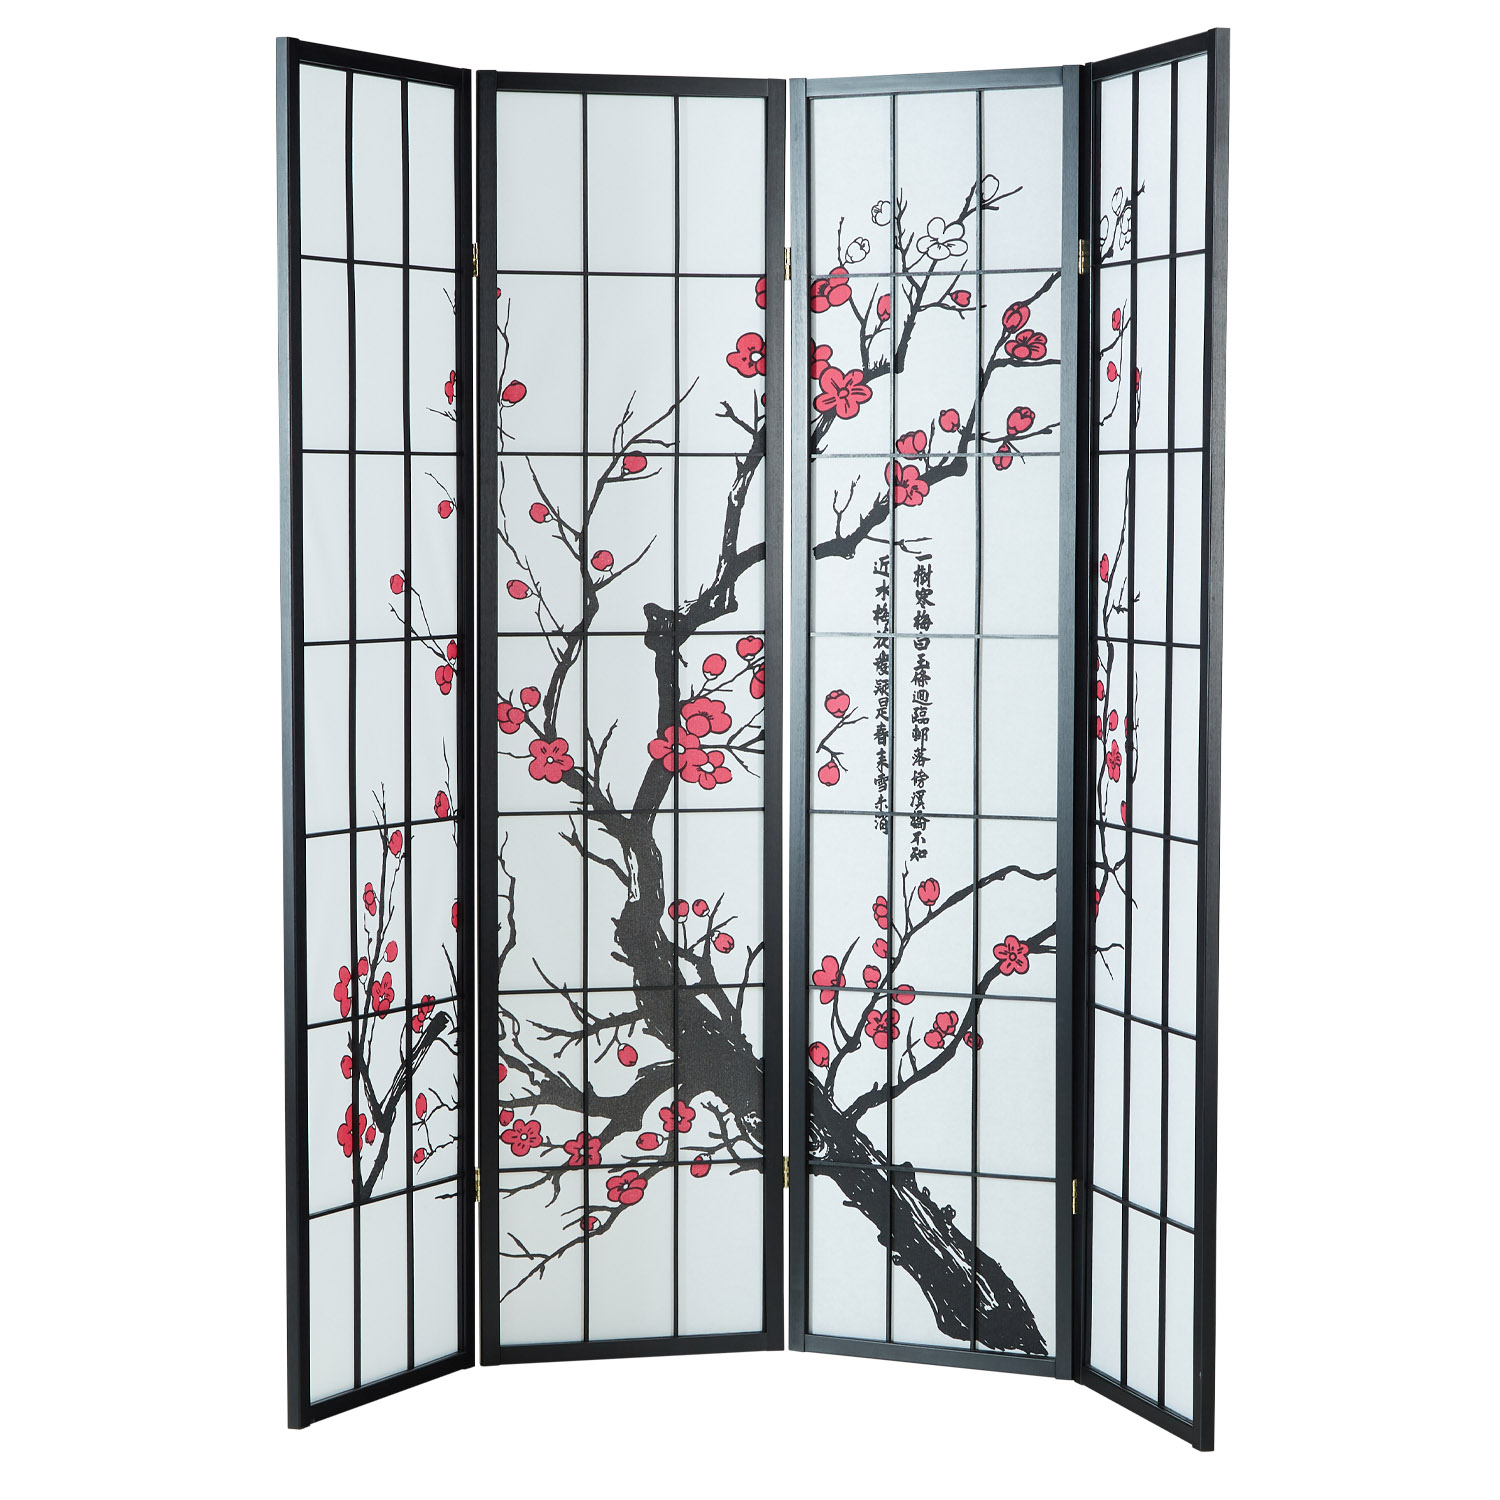 Paravent room divider 3 4 5 parts, wood black, rice paper white, cherry pattern